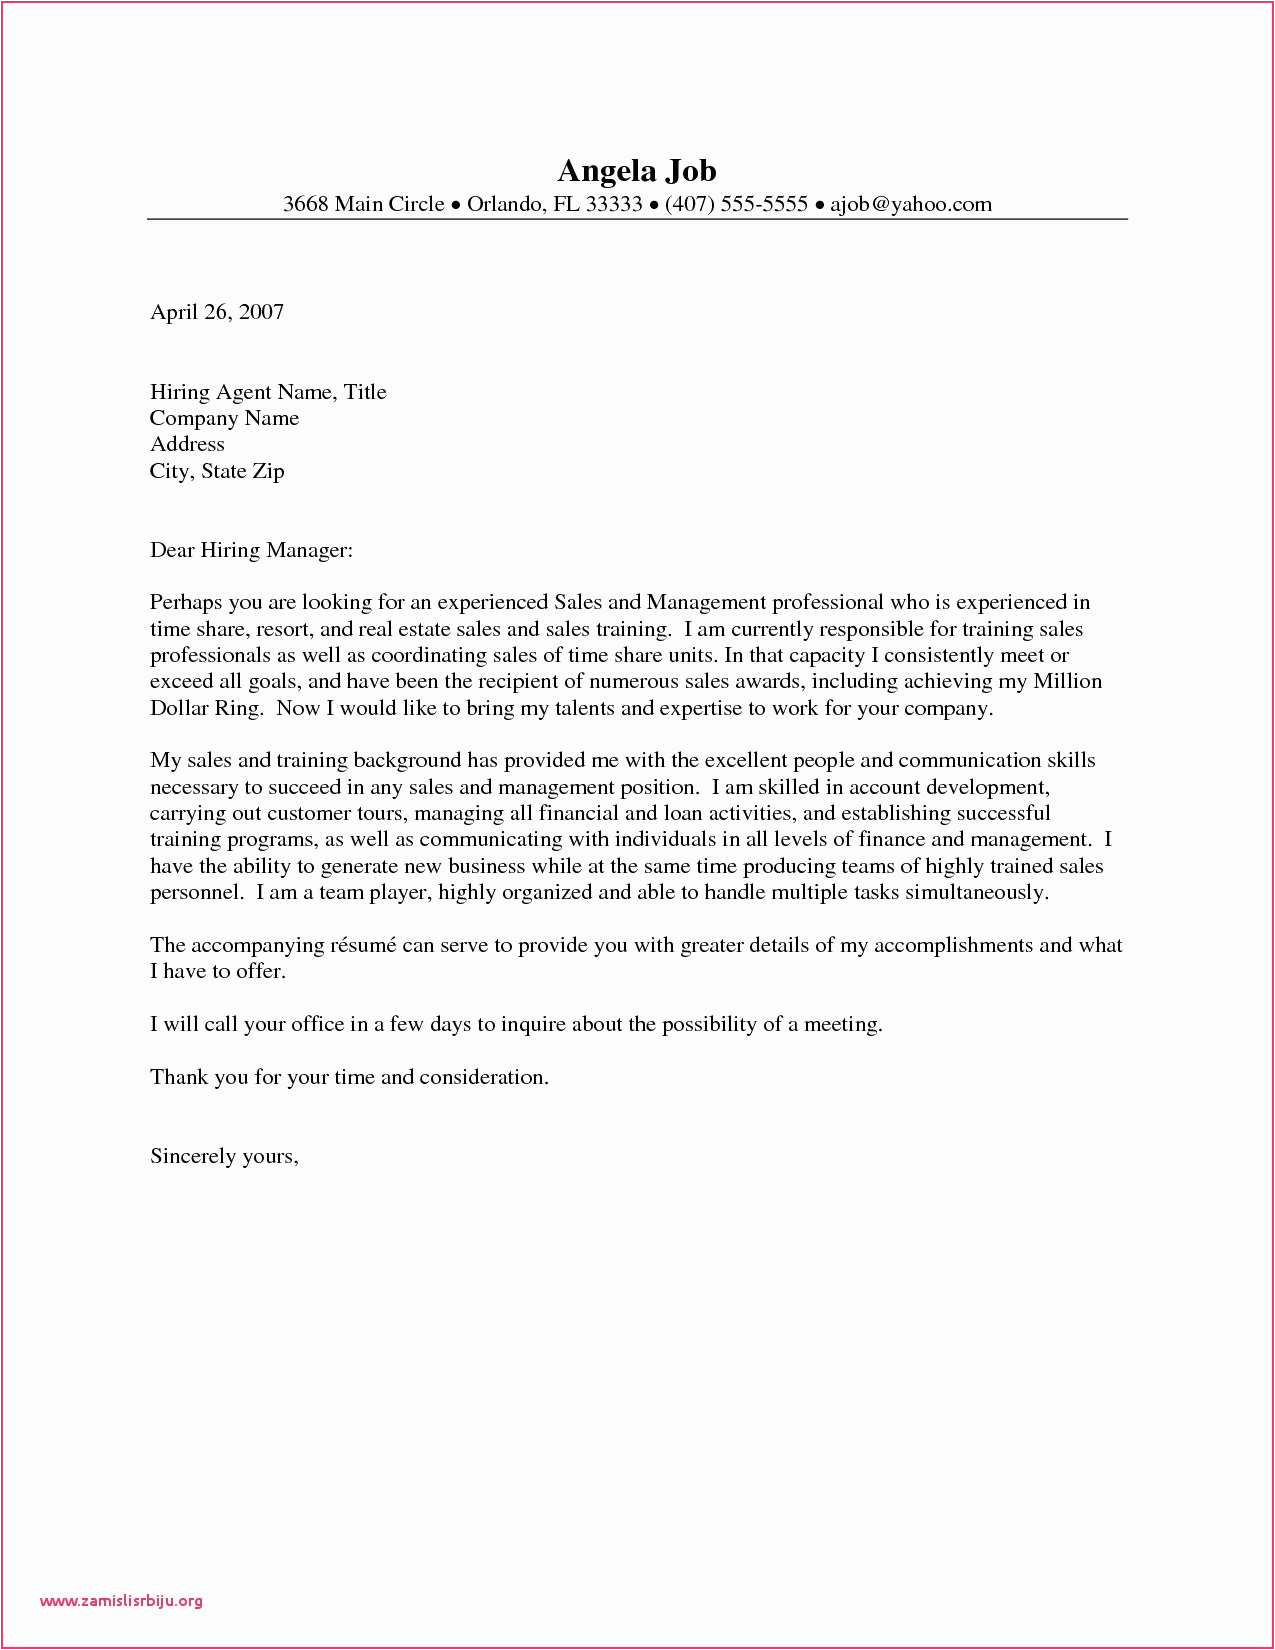 terminate property management agreement sample letter with real estate resume cover letter resume sample word best real estate of terminate property management agreement sample letter jpg